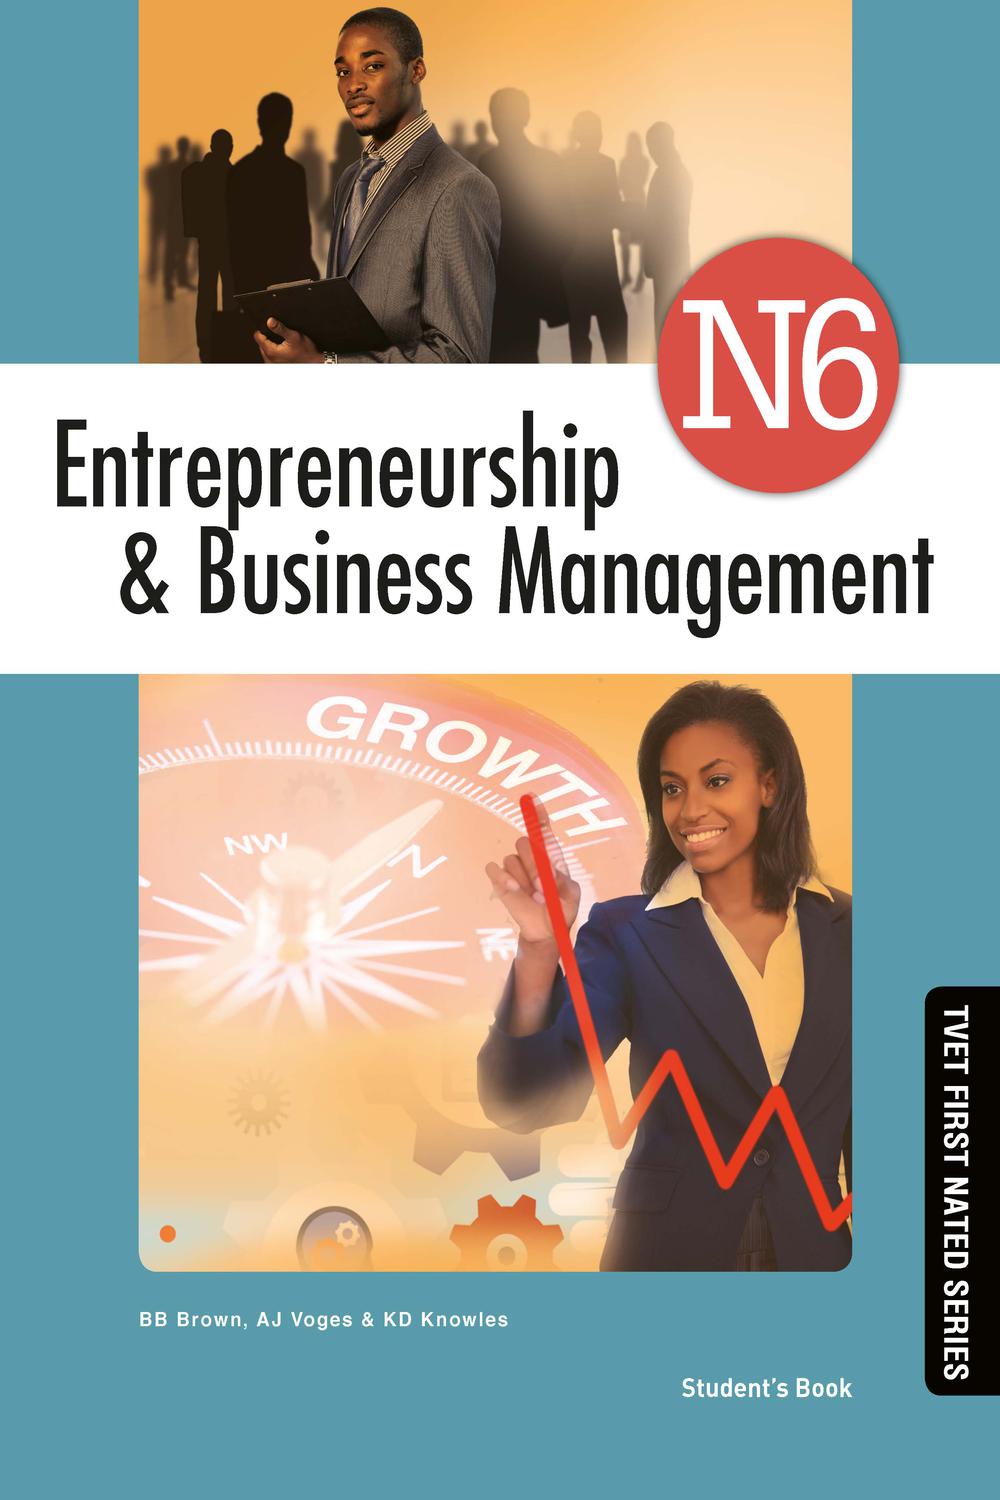 entrepreneurship and business management n6 2nd edition bb brown, aj voges , kd knowles 1430804181,